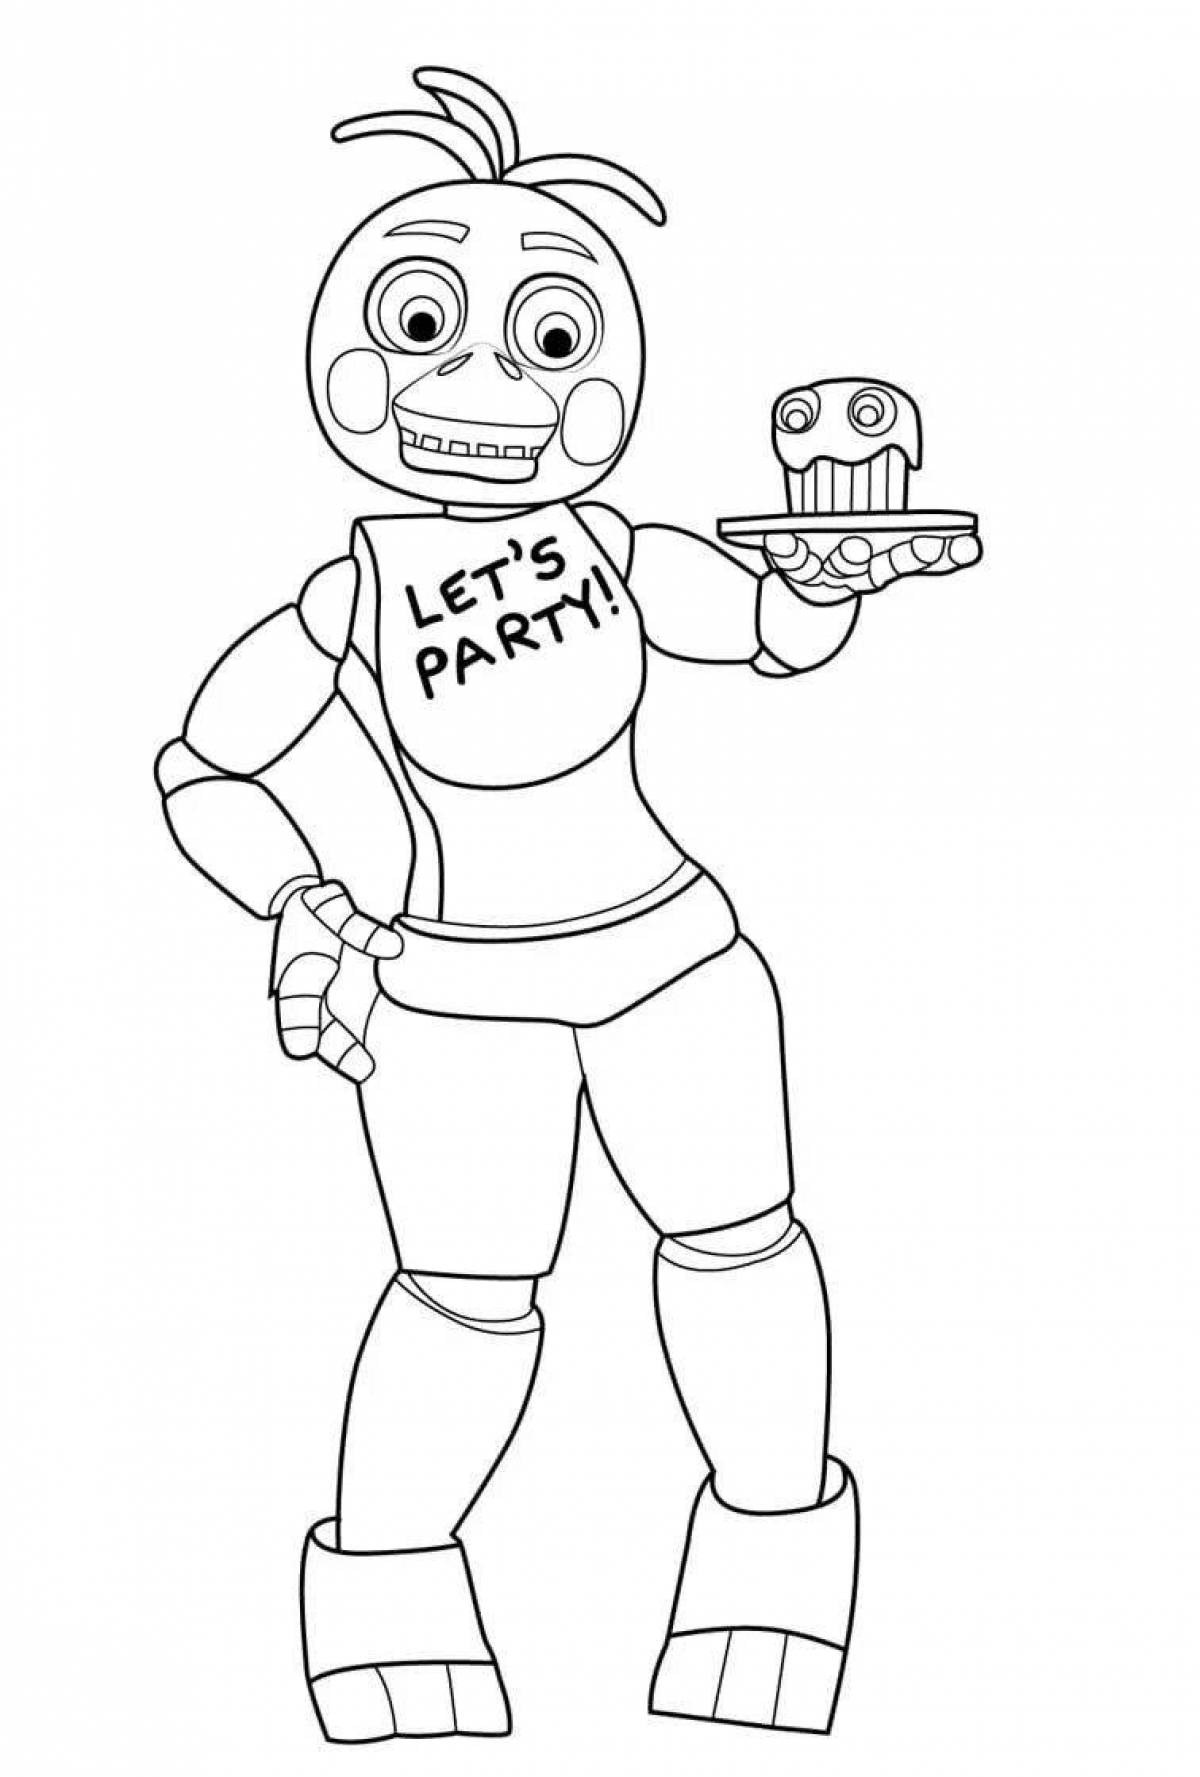 Coloring page captivating fnaf chick 1